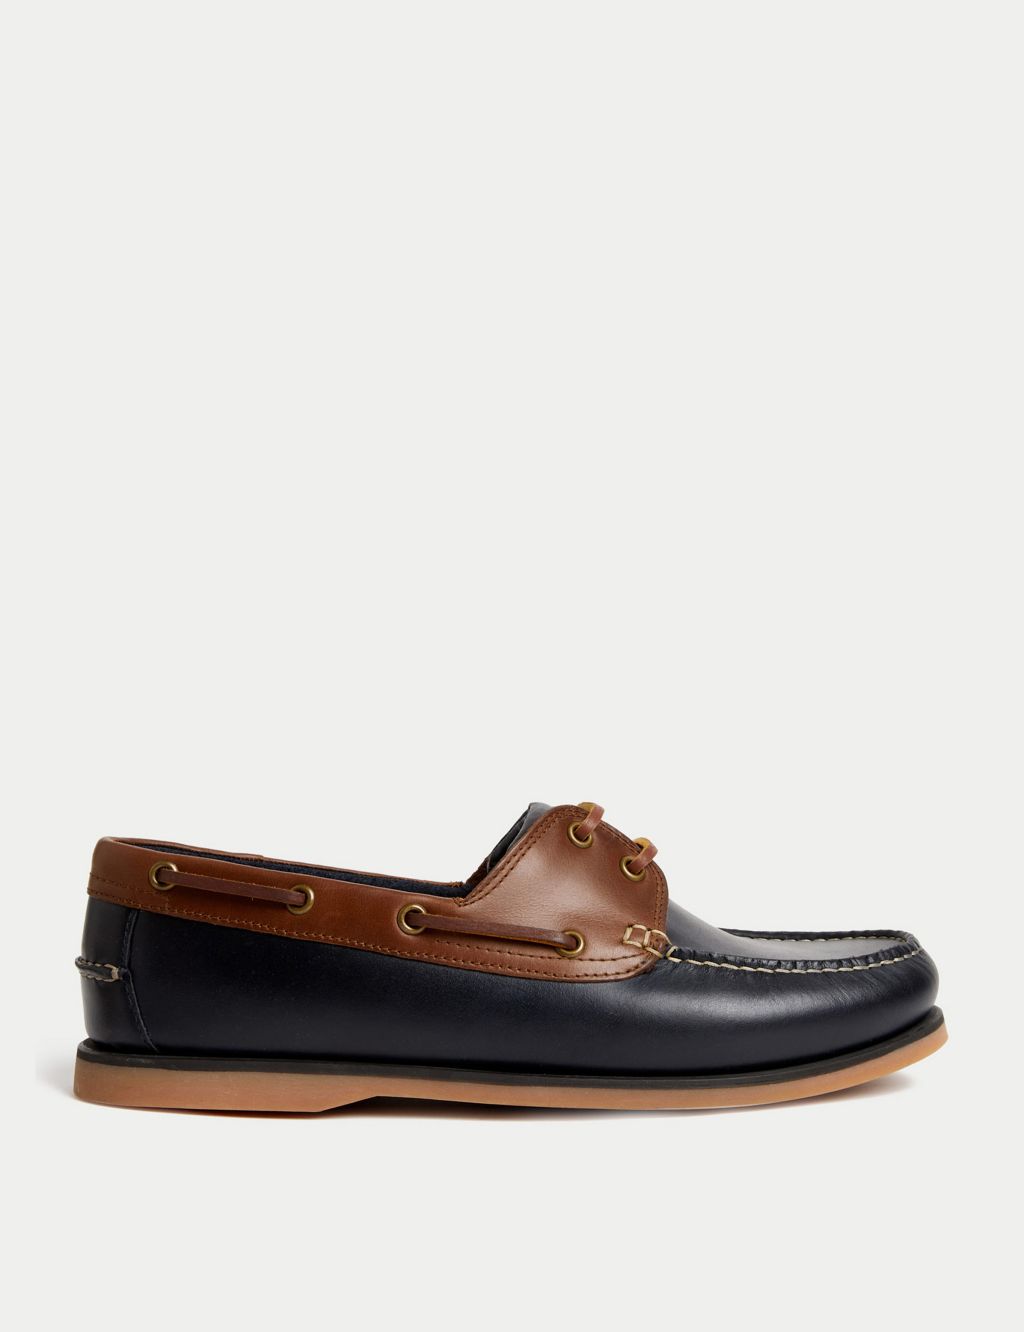 Wide Fit Leather Deck Shoes image 1